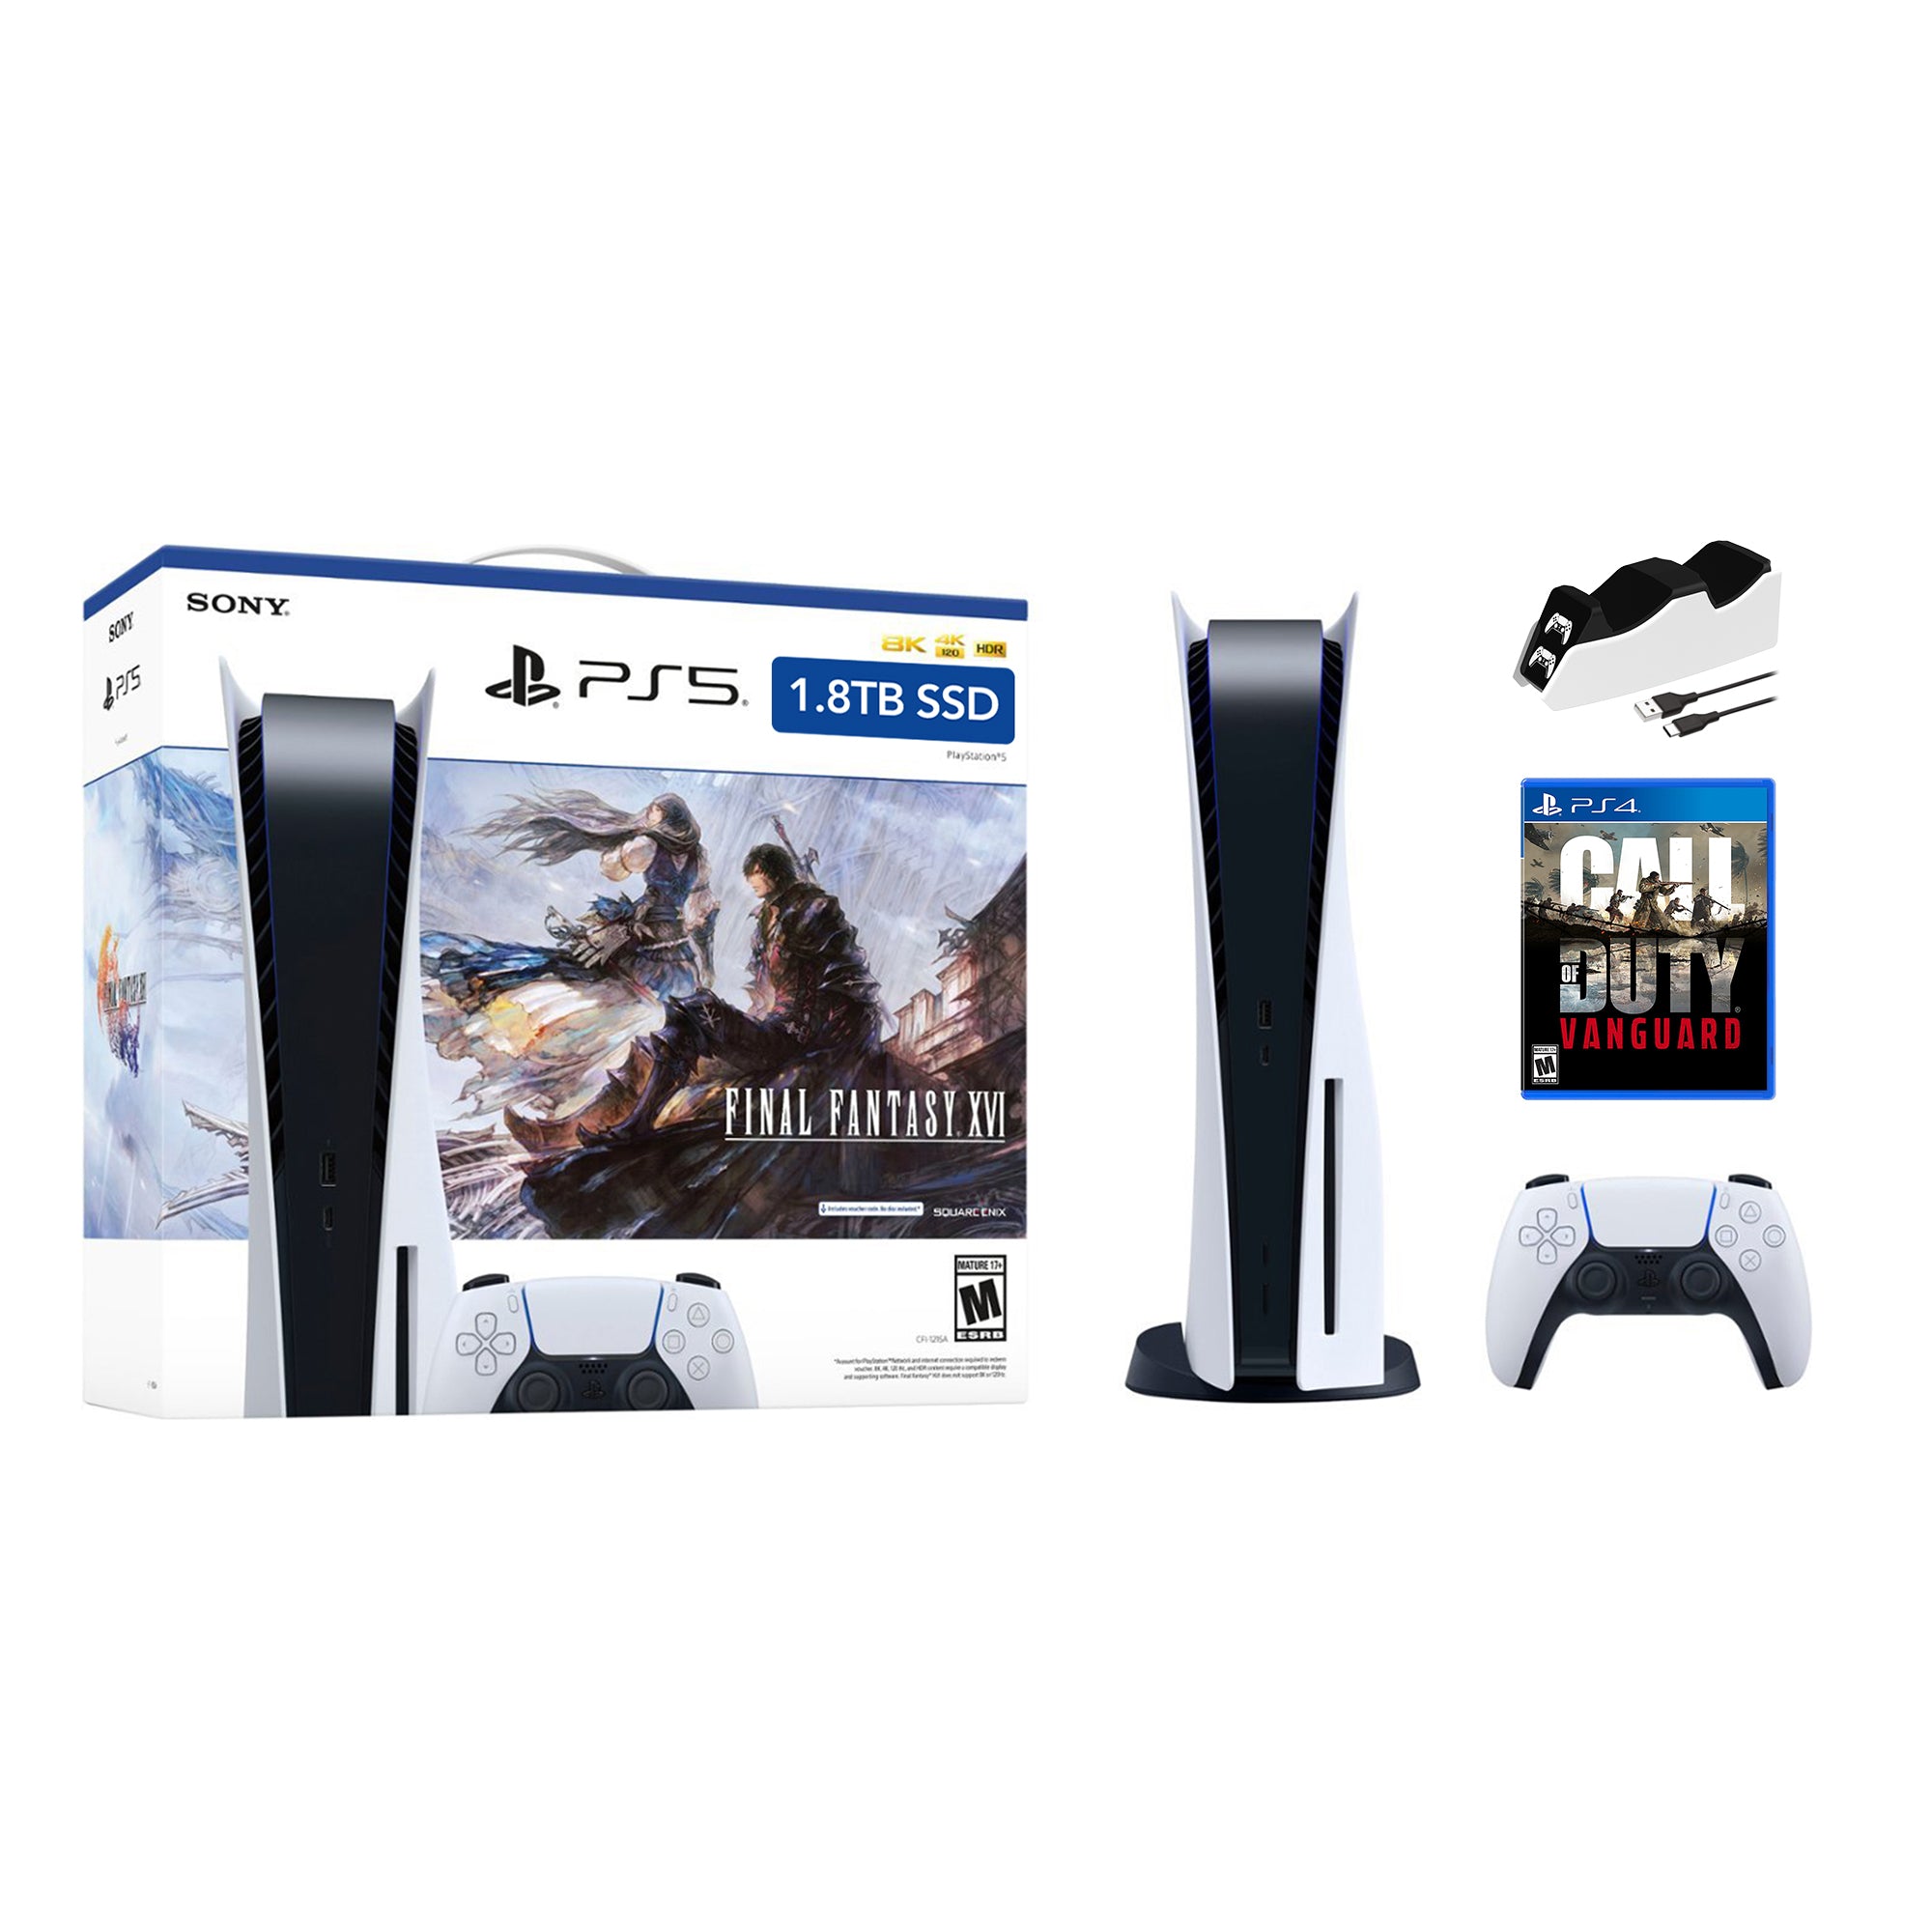 PlayStation 5 Upgraded 1.8TB Disc Edition FINAL FANTASY XVI Bundle with Call of Duty Vanguard and Mytrix Controller Charger - PS5, White